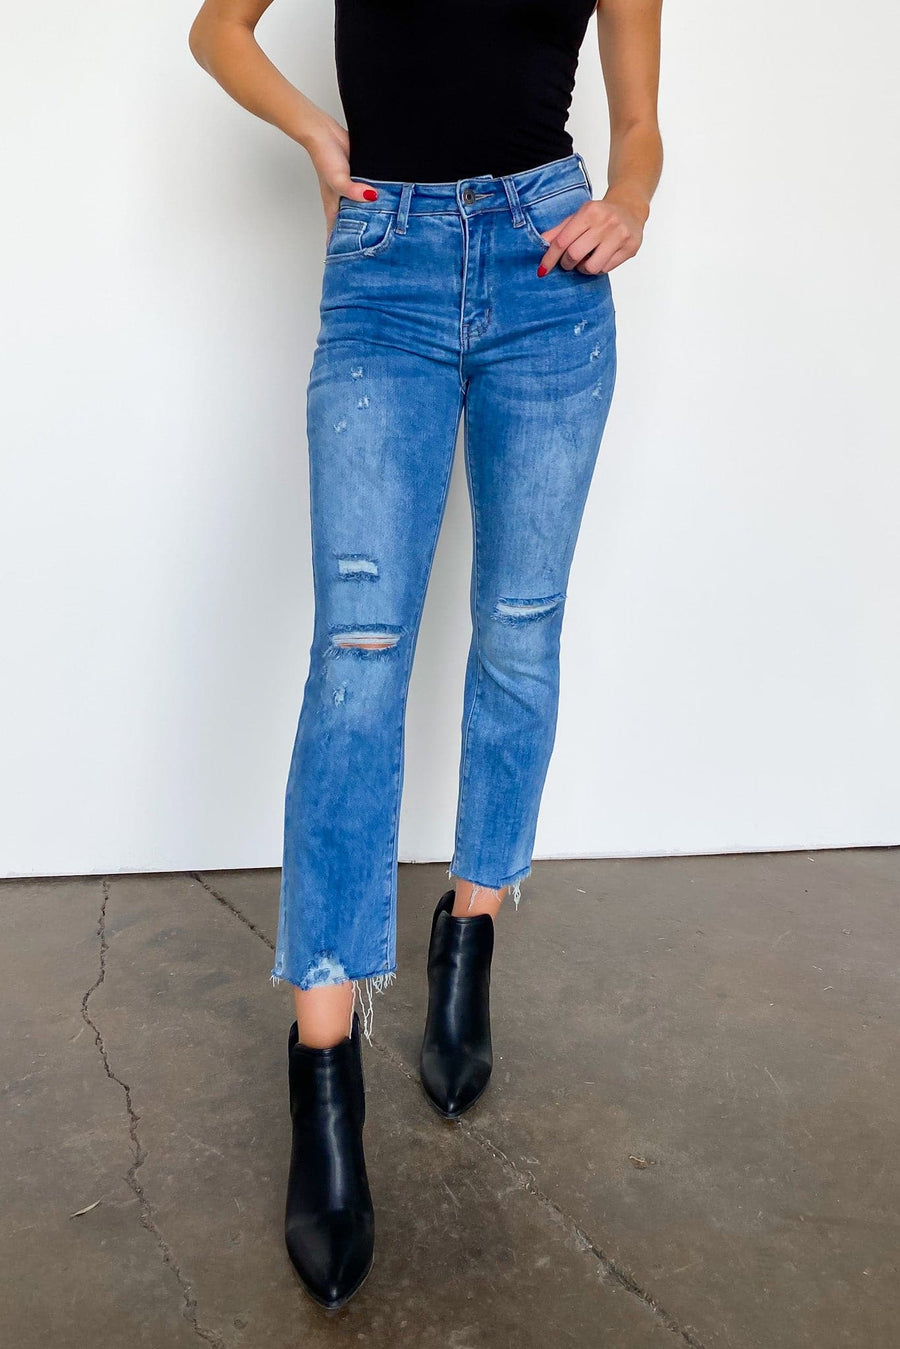 1 / Medium Calder High Rise Vintage Washed Straight Jeans - FINAL SALE - Madison and Mallory